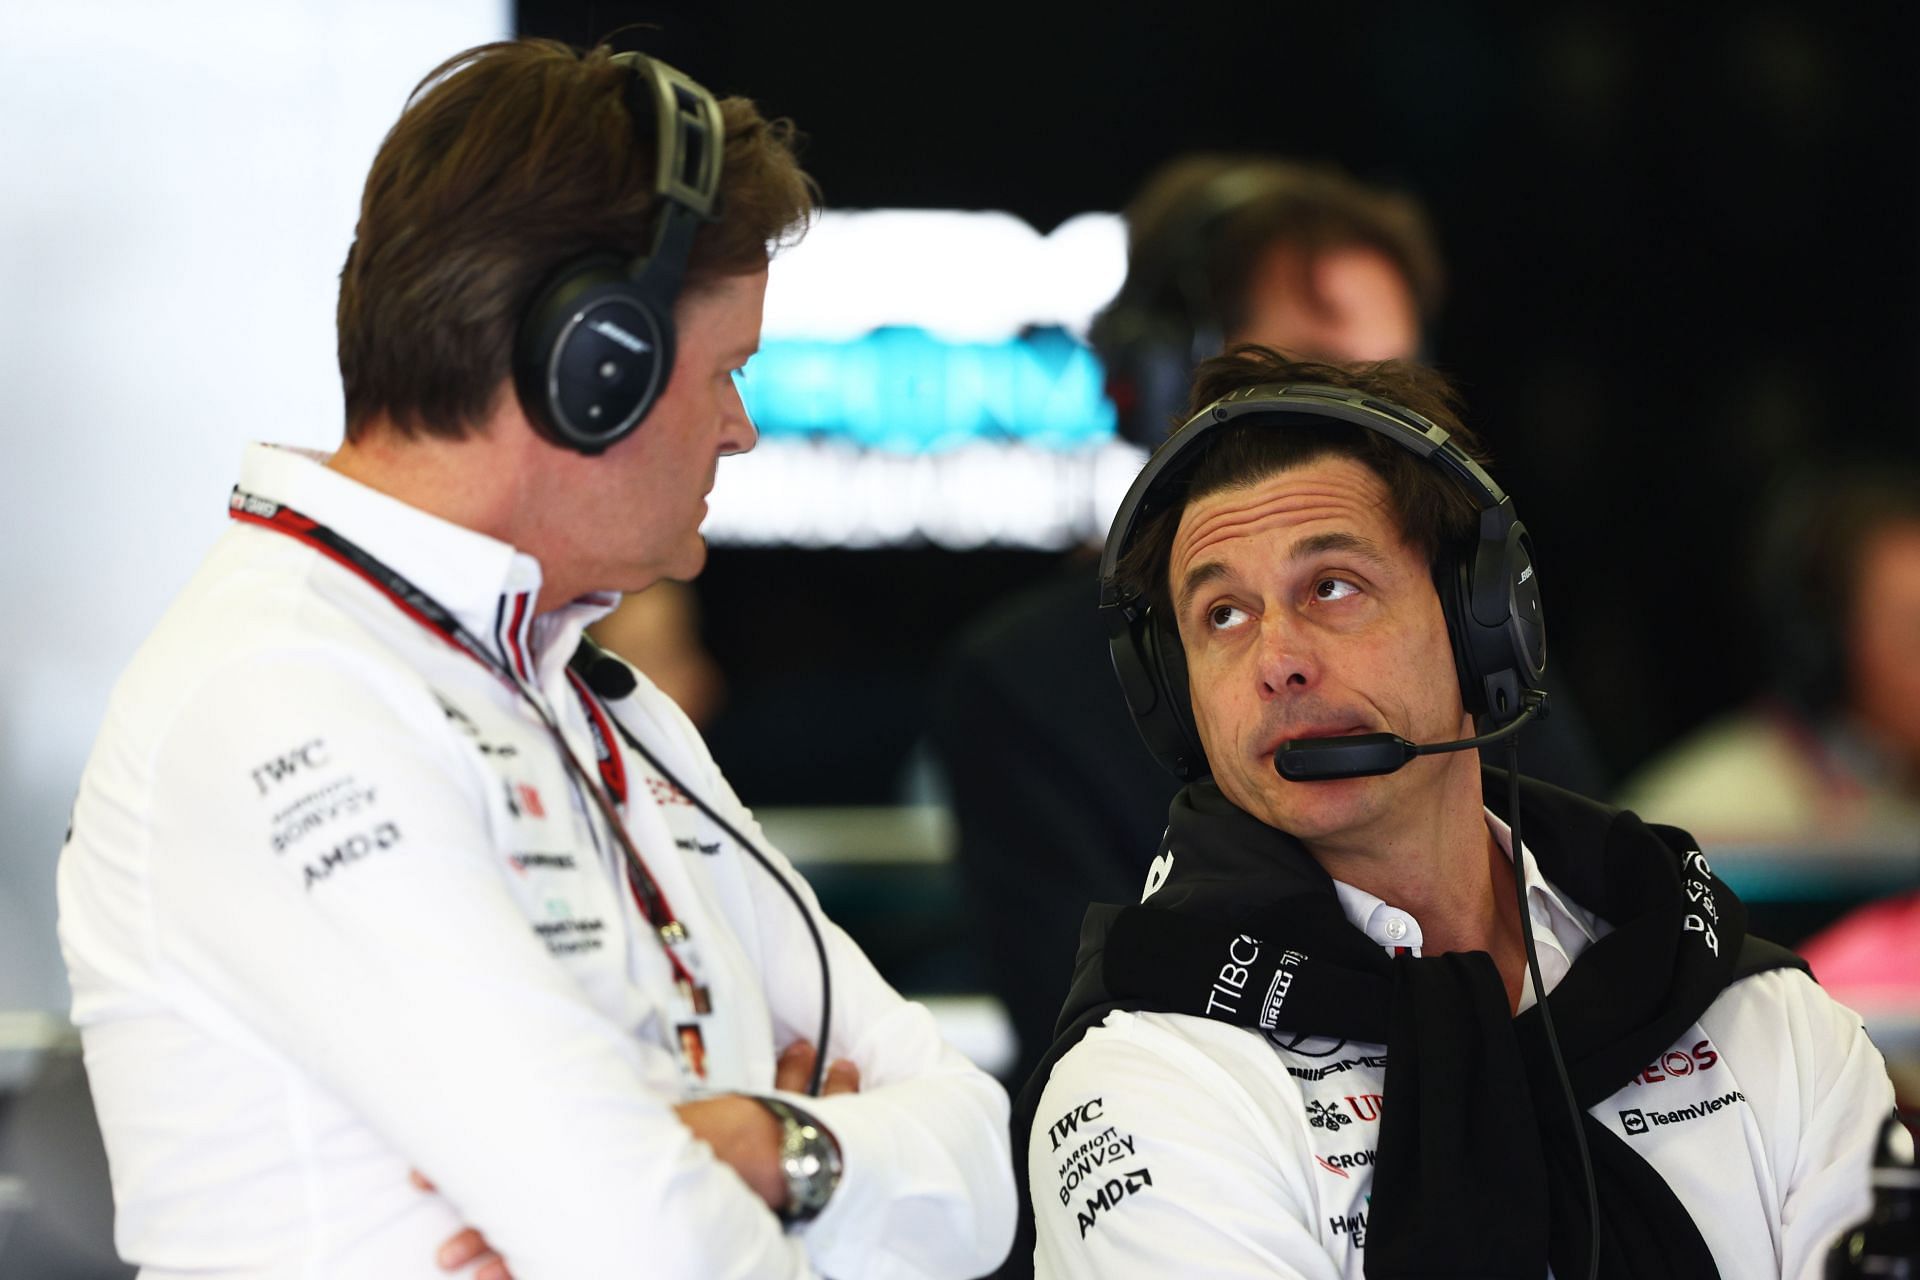 Mercedes GP Executive Director Toto Wolff talks with Markus Schaefer, Chief Technology Officer, Develpment &amp; Purchasing of Mercedes-Benz, during practice ahead of the F1 Grand Prix of Austria at Red Bull Ring on July 09, 2022 in Spielberg, Austria. (Photo by Clive Rose/Getty Images)